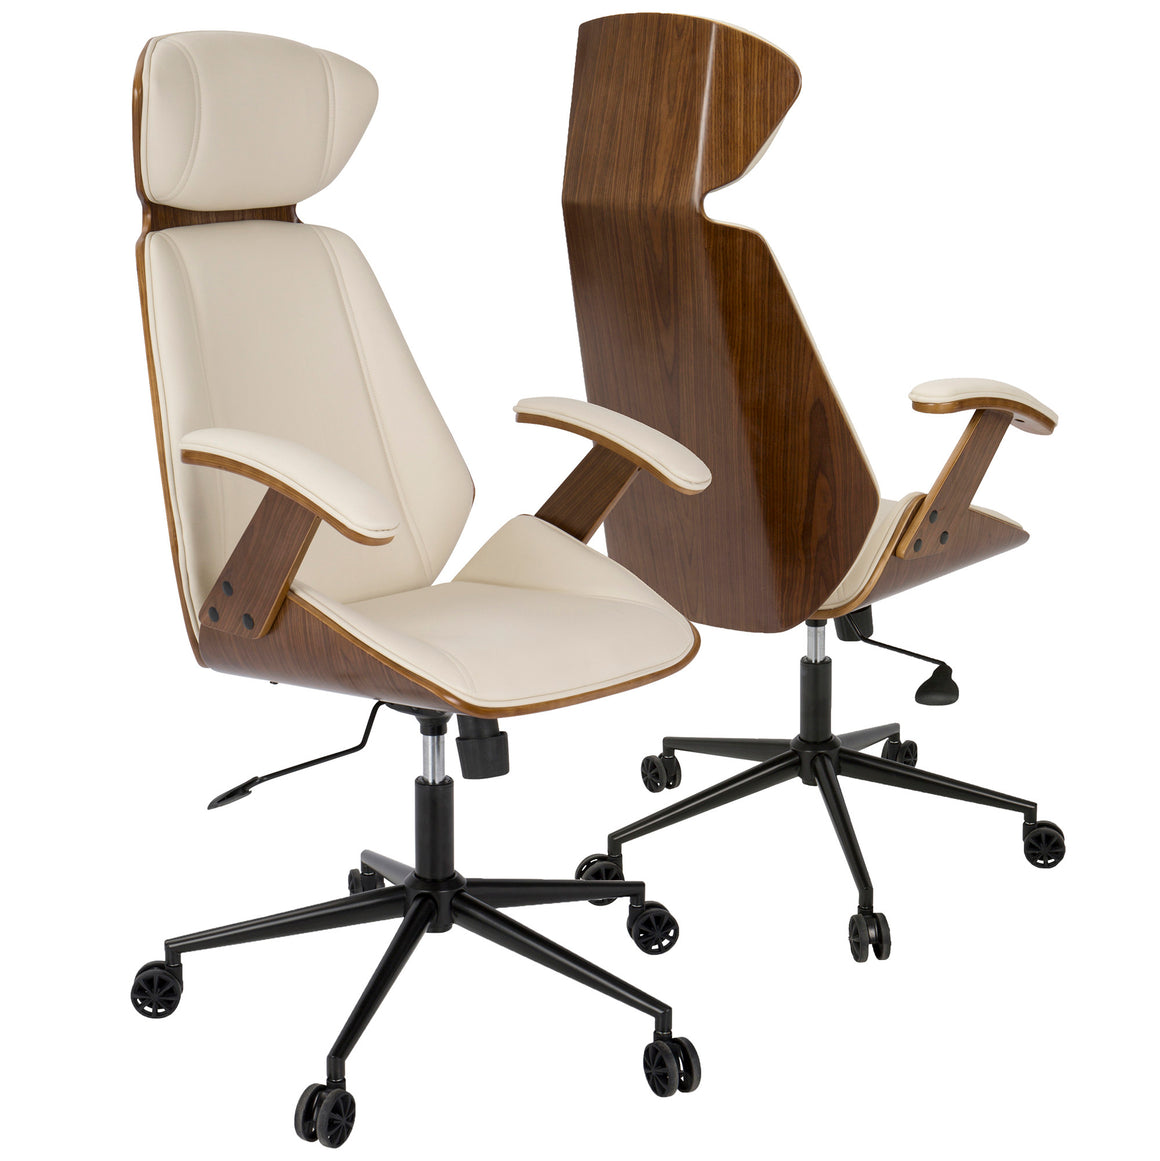 Spectre Mid-Century Modern Adjustable Office Chair in Walnut Wood and Cream Faux Leather by LumiSource